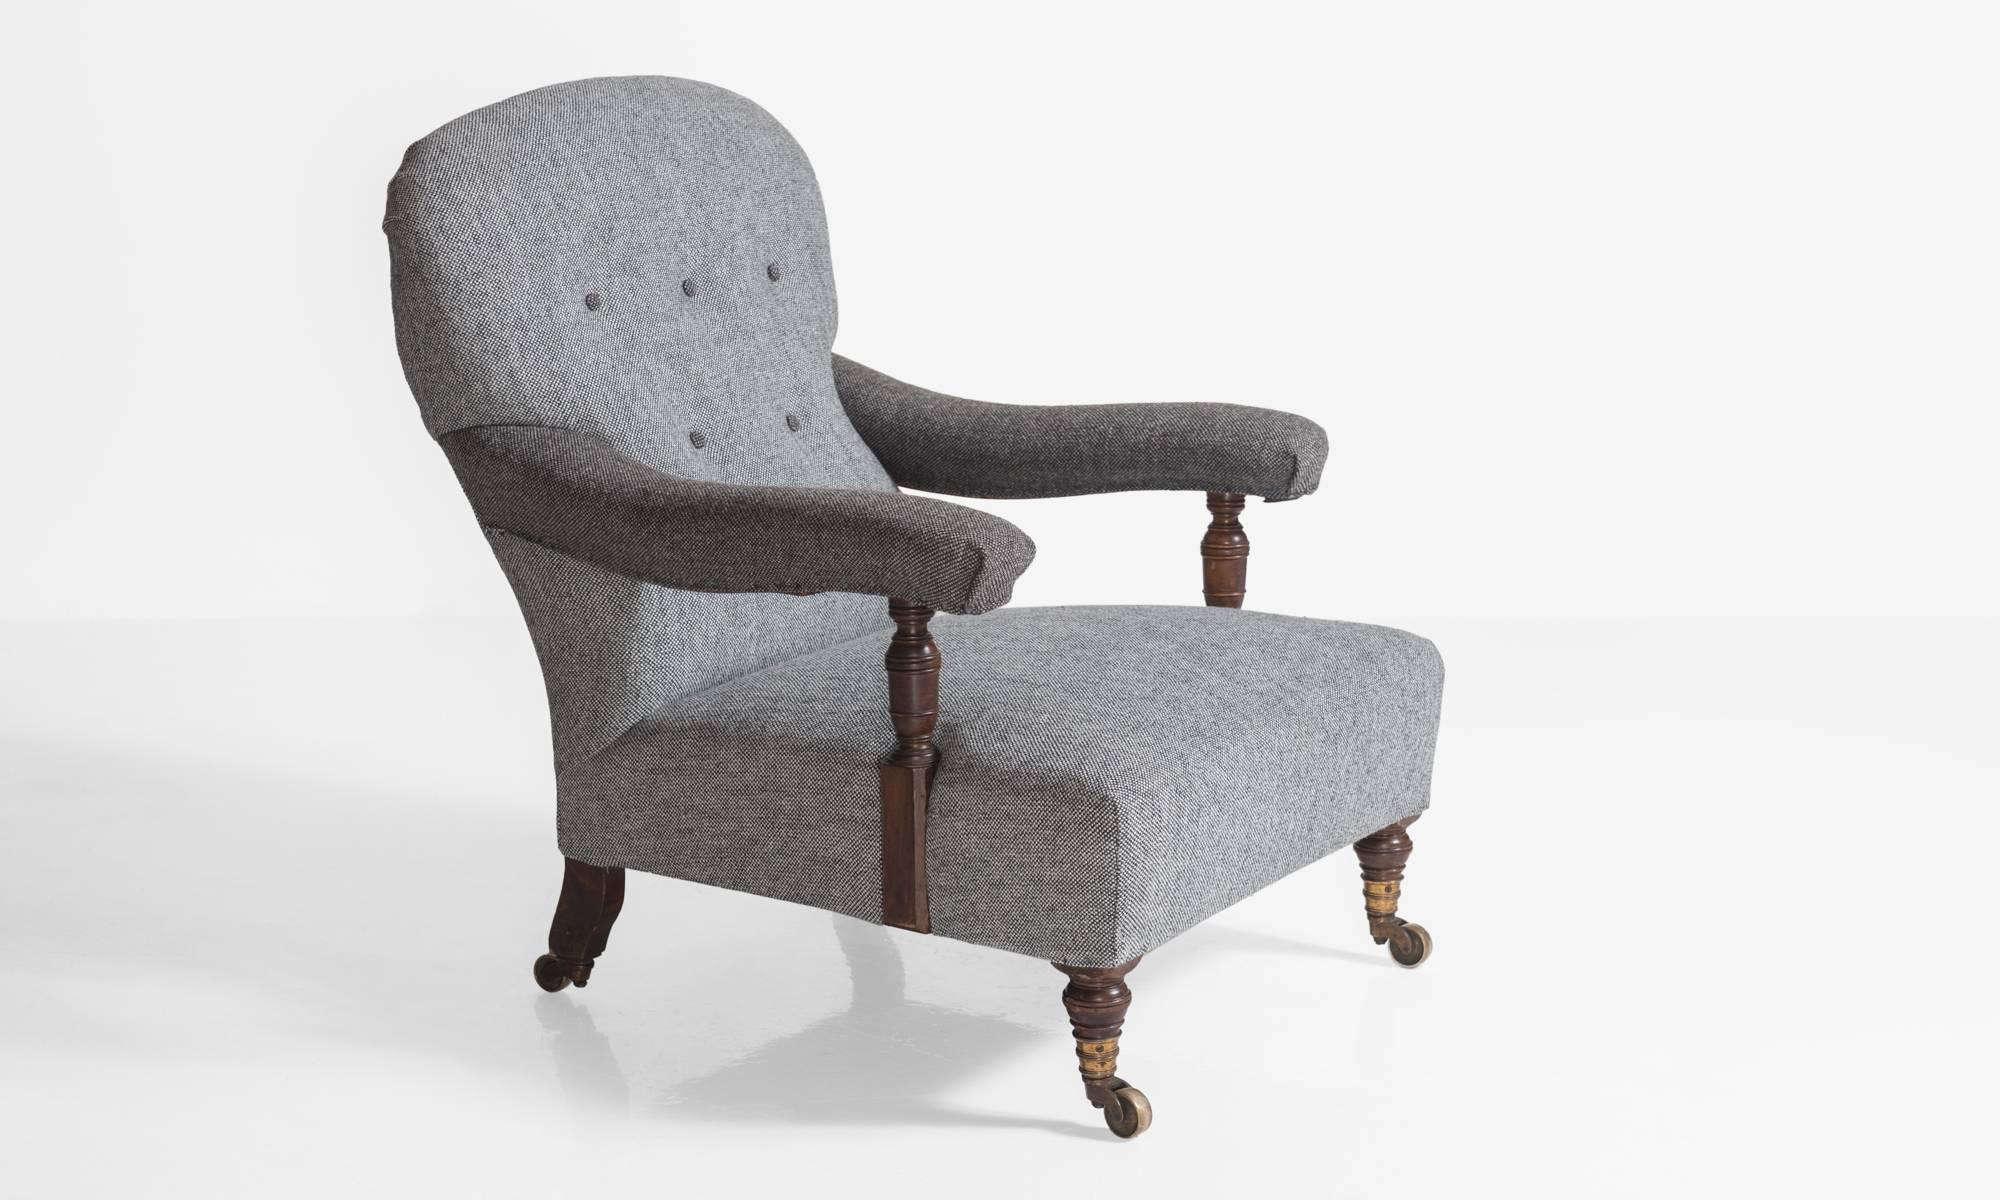 Howard & Sons Wool Armchair, England, circa 1890

Low armchair, by the London makers, Howard & Sons, reupholstered in contrasting Maharam Wool Fabric. Turned walnut supports and legs on original brass castors. 